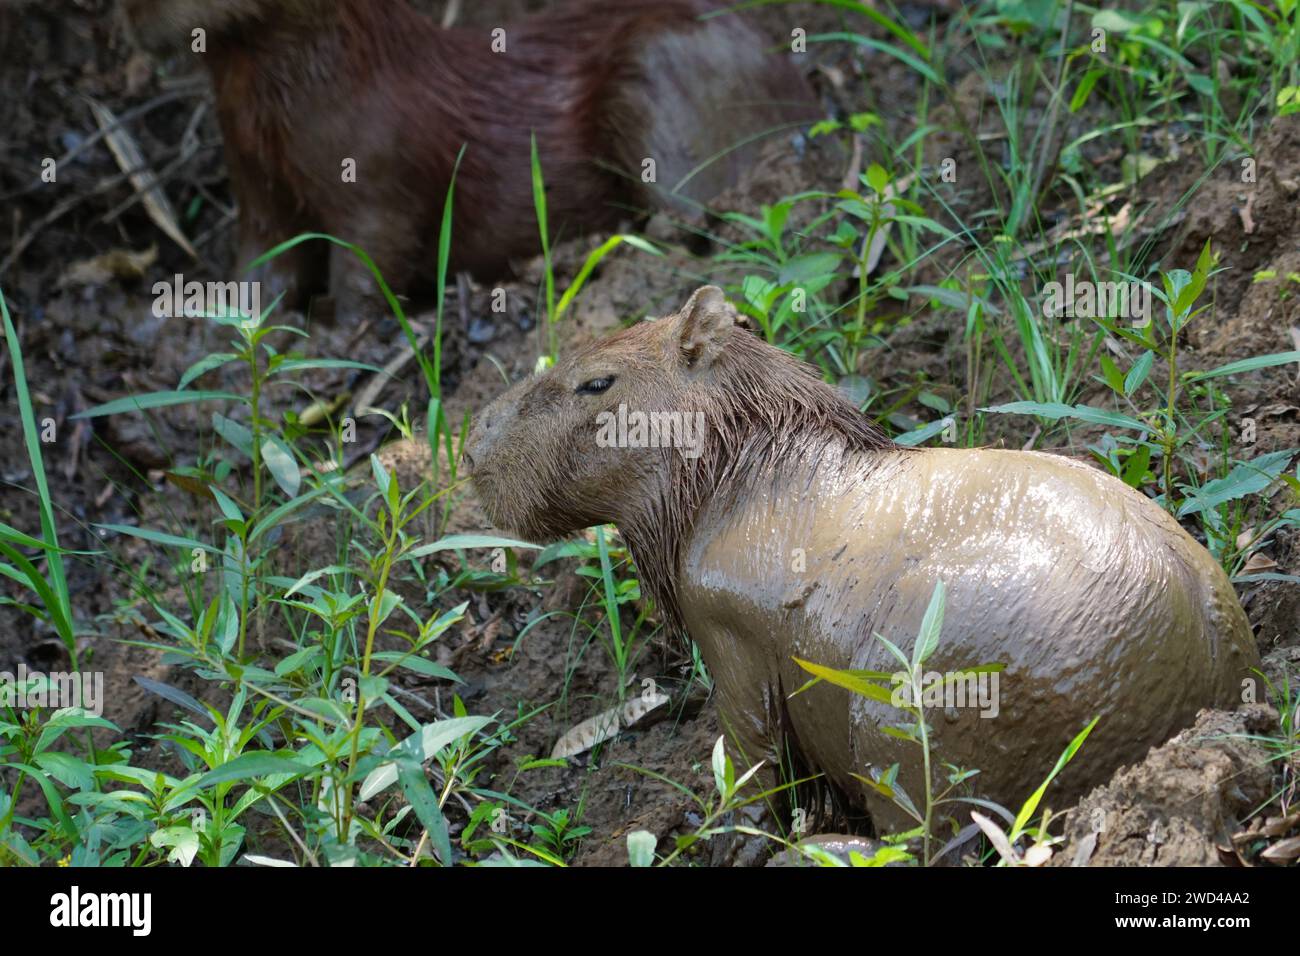 Capybara Amazon Forest. Covered in mud living in its natural habitat surround by plants at Tambopata in the Amazon of Peru Stock Photo